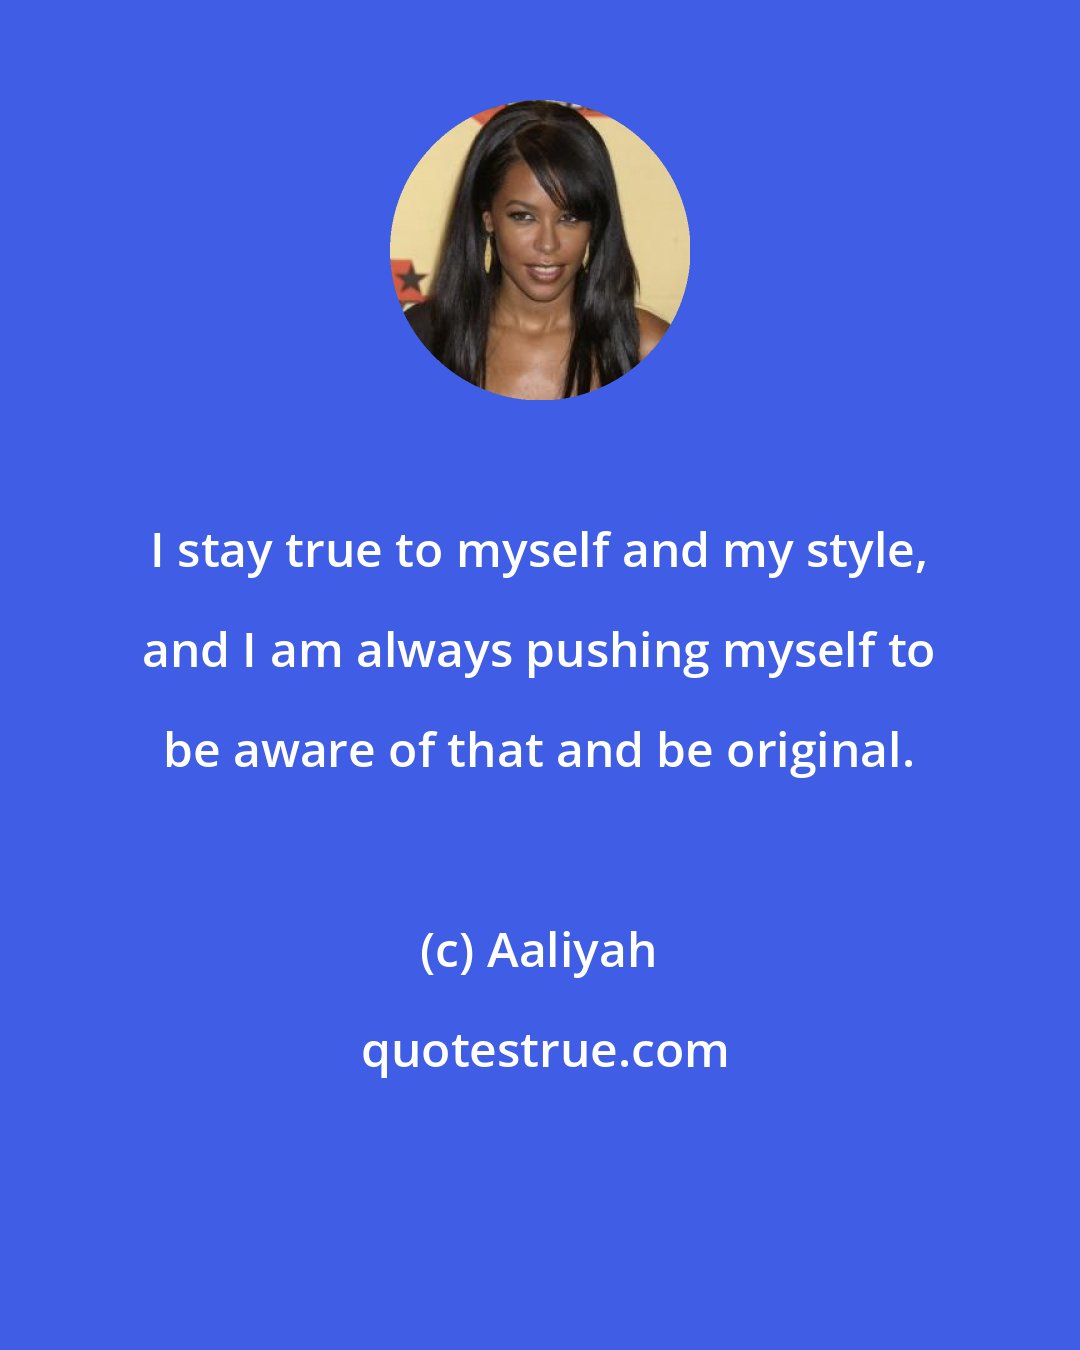 Aaliyah: I stay true to myself and my style, and I am always pushing myself to be aware of that and be original.